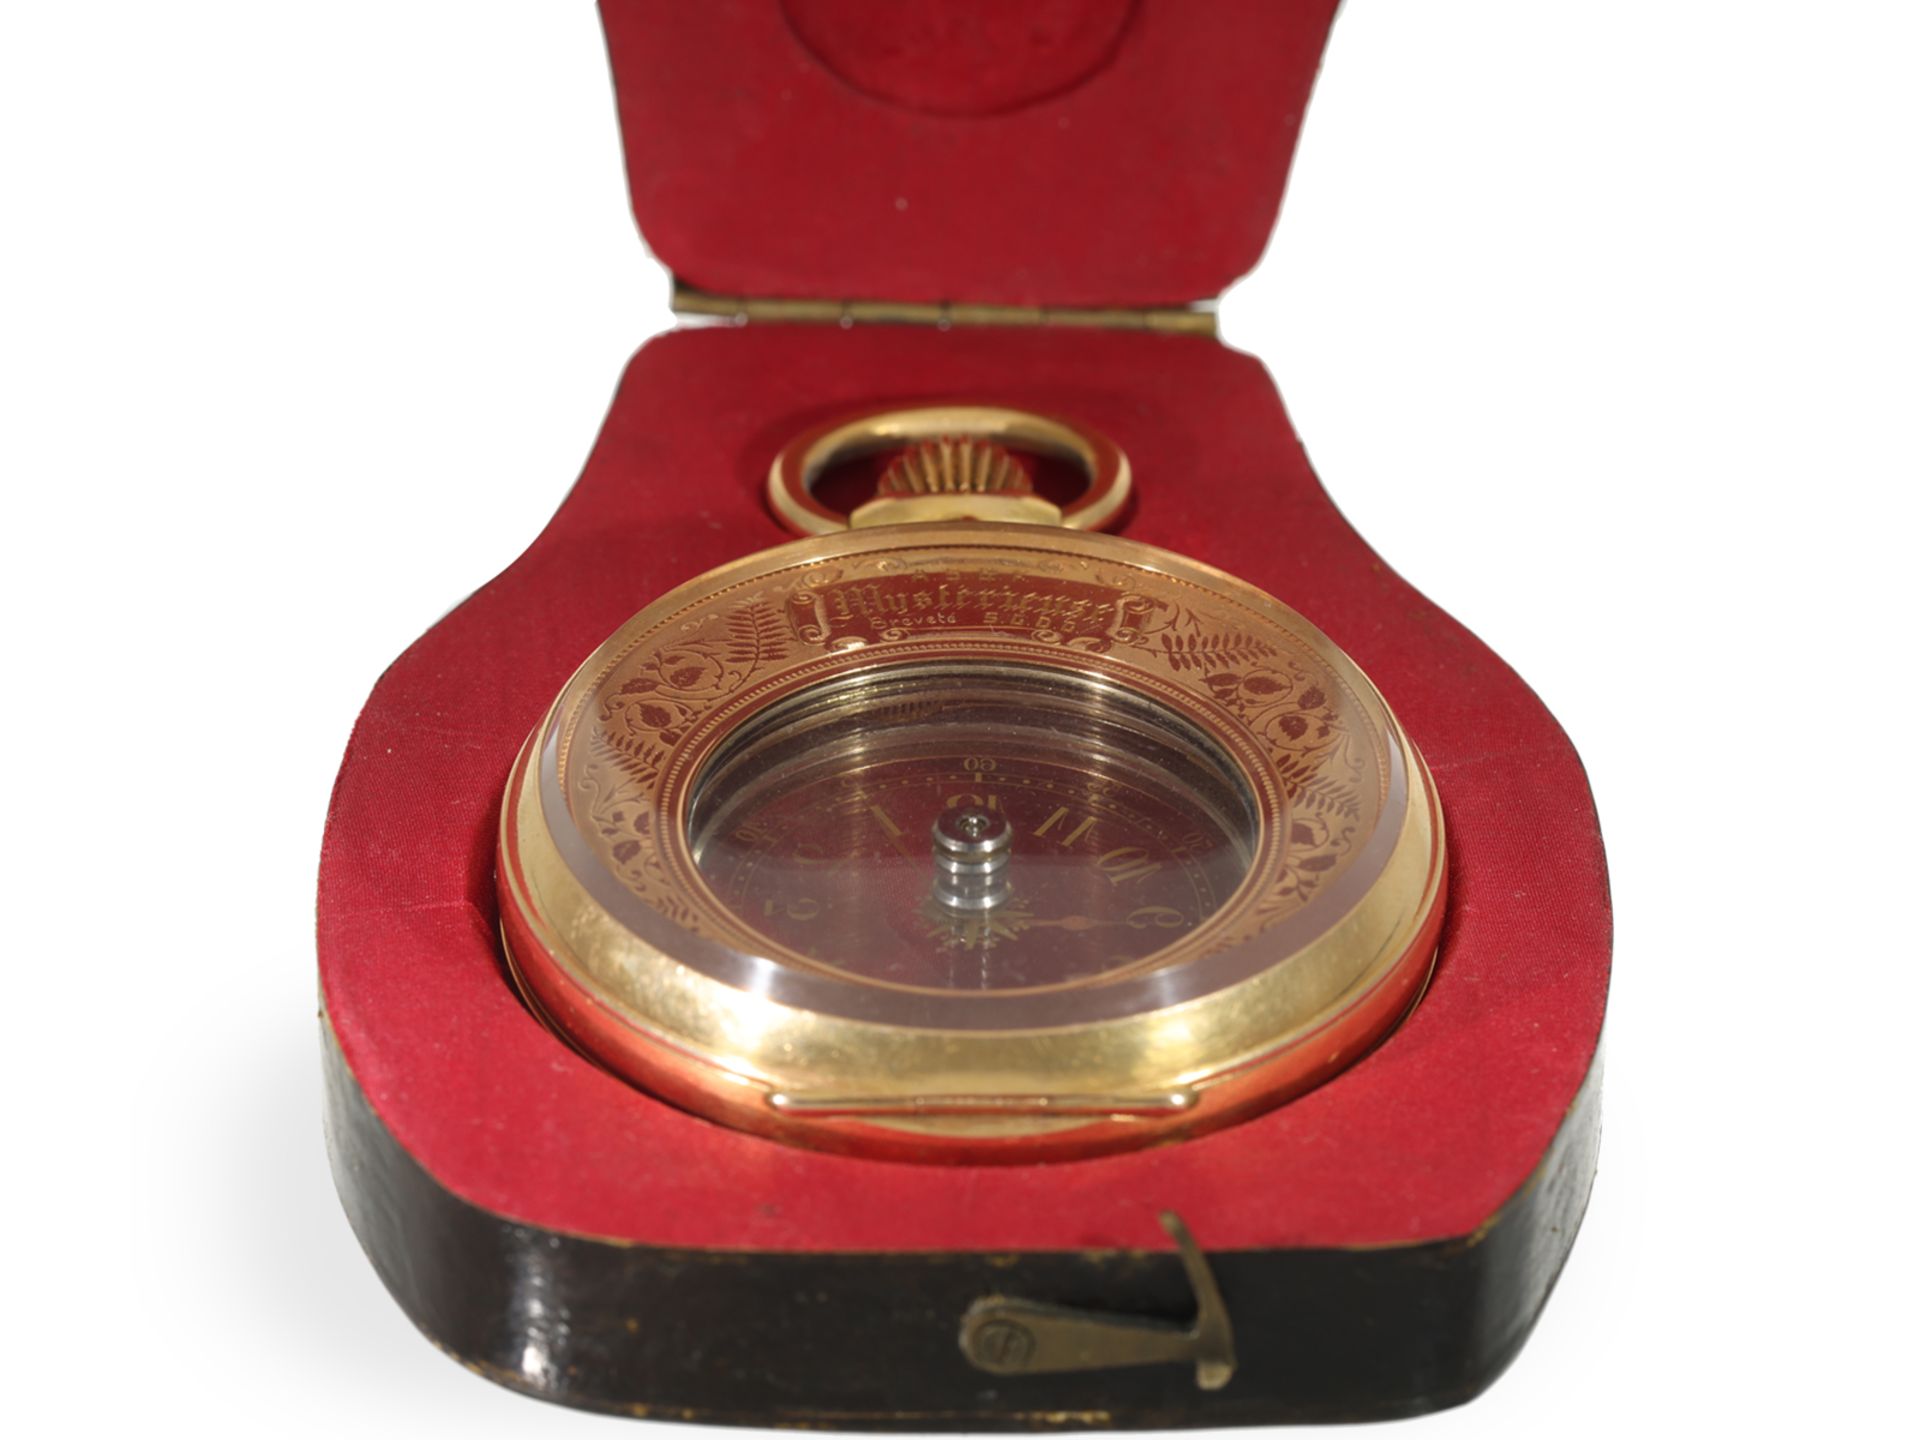 Pocket watch: unique, extremely rare "Mysterieuse" in gold with enamel decoration, original box - Image 4 of 4